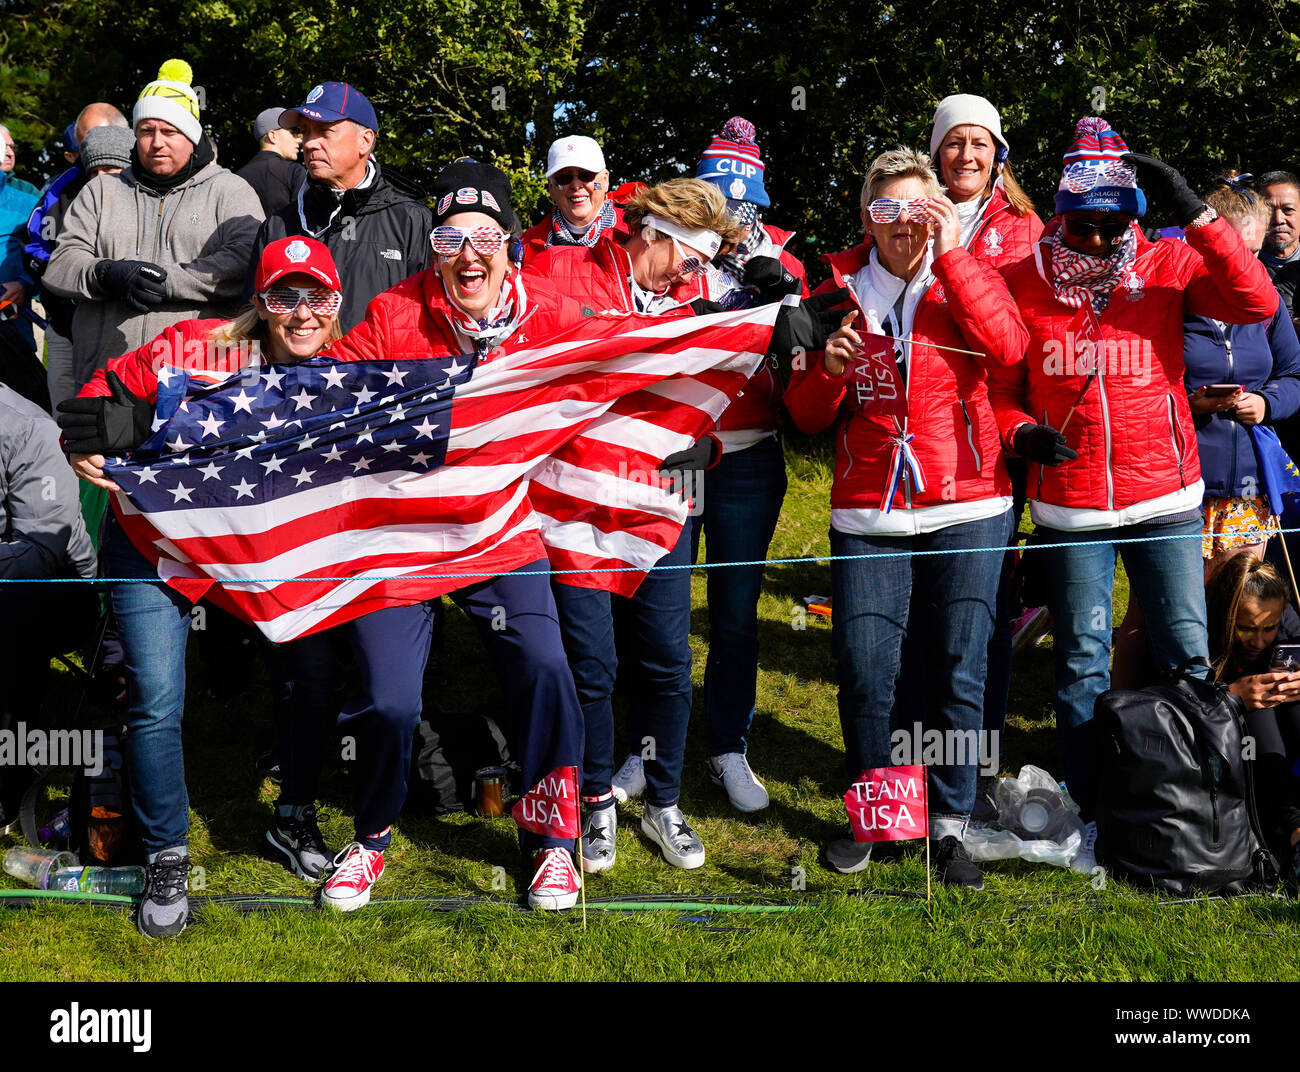 Auchterarder, Scotland, UK. 15 September 2019. Sunday Singles matches on final day  at 2019 Solheim Cup on Centenary Course at Gleneagles. Pictured; Enthusiastic Team USA fans with flag beside the 10th green. Iain Masterton/Alamy Live News Stock Photo